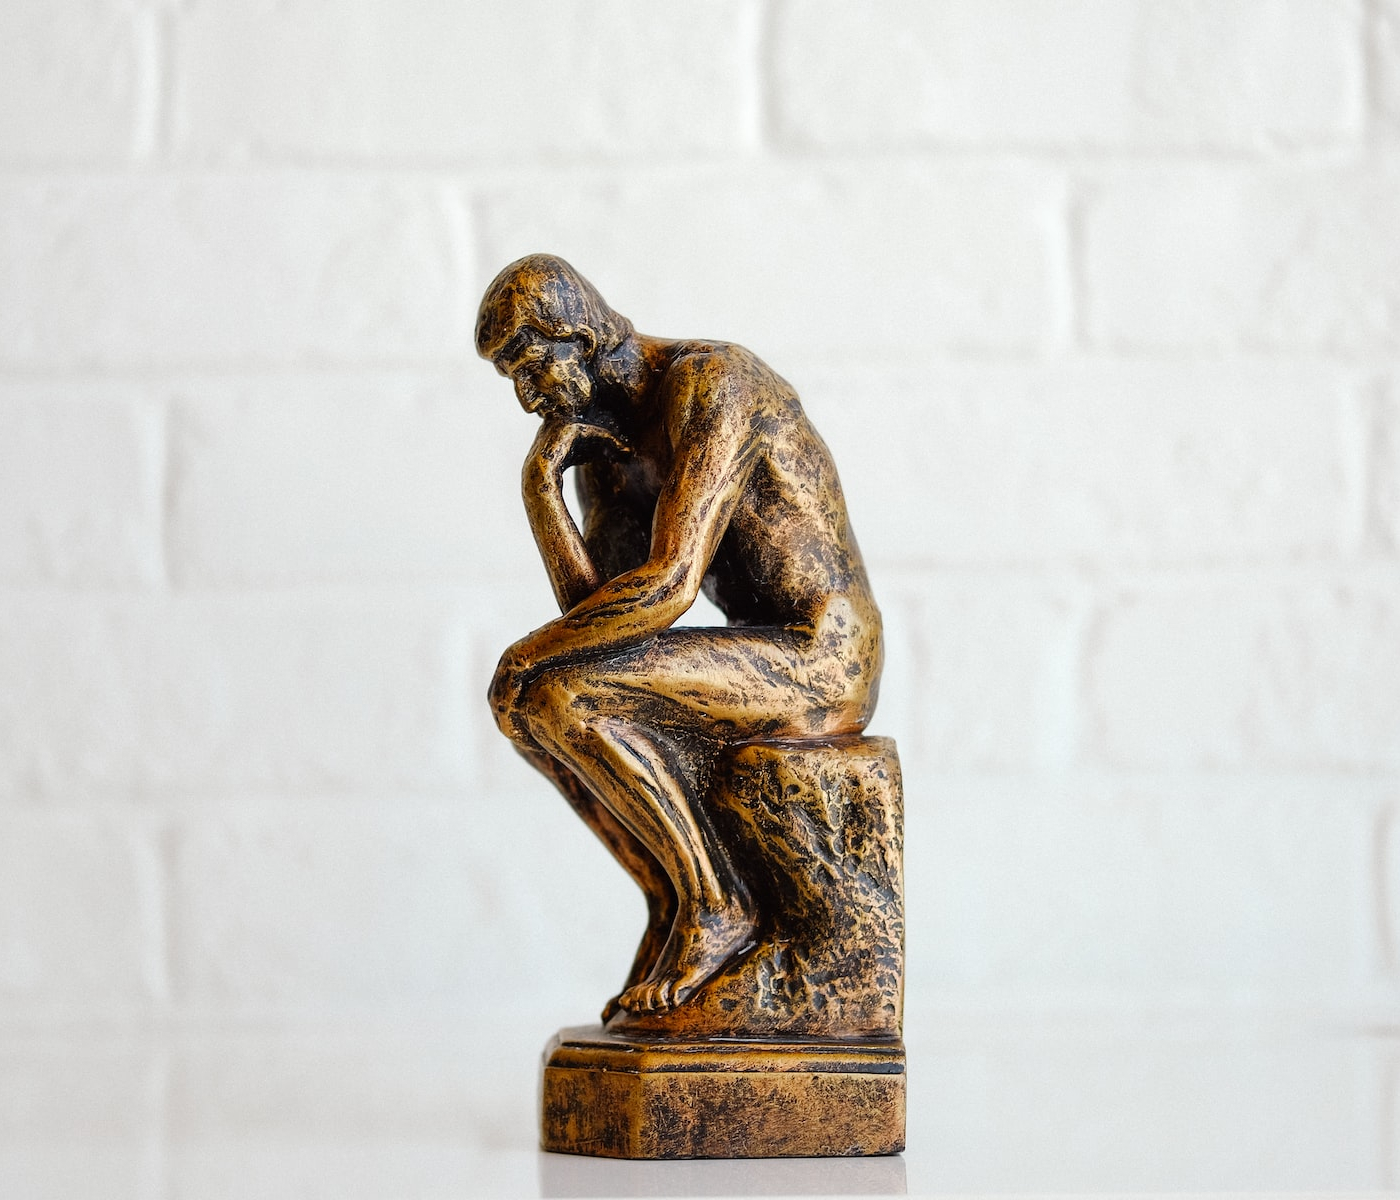 Image of statue of The Thinker